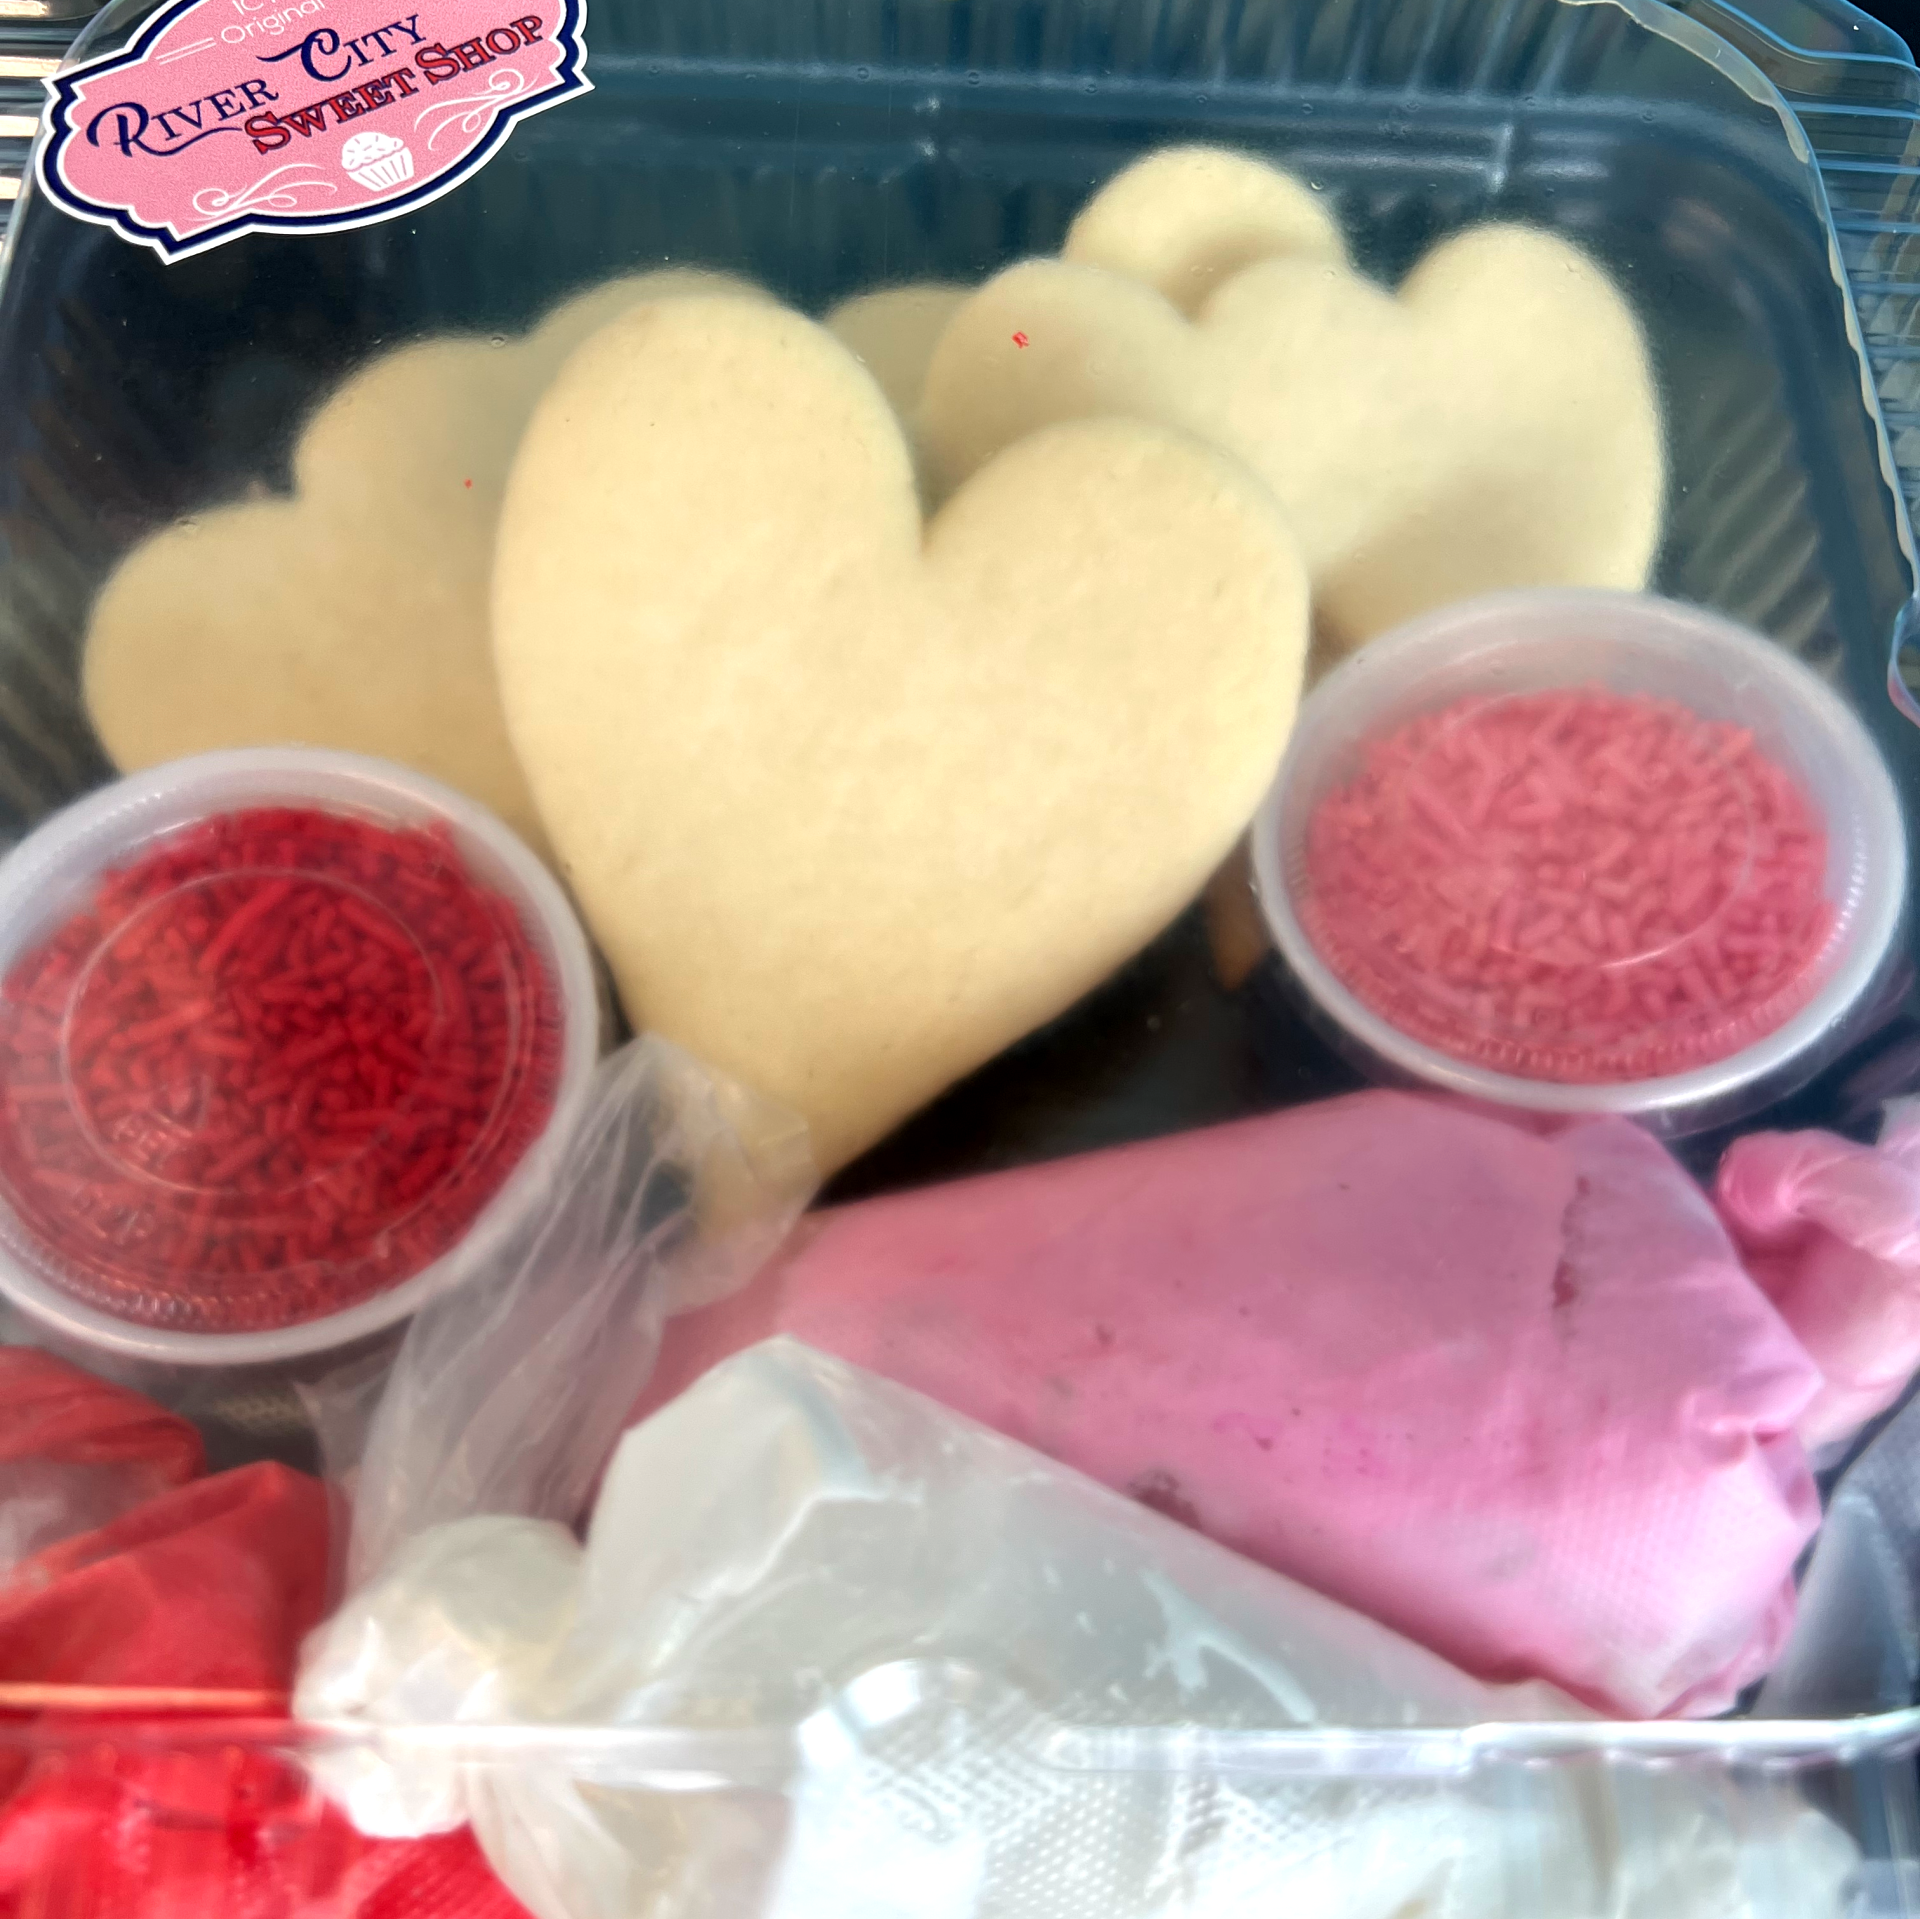 A box with cups of sprinkles, small bags of icing, and plain heart shaped sugar cookies